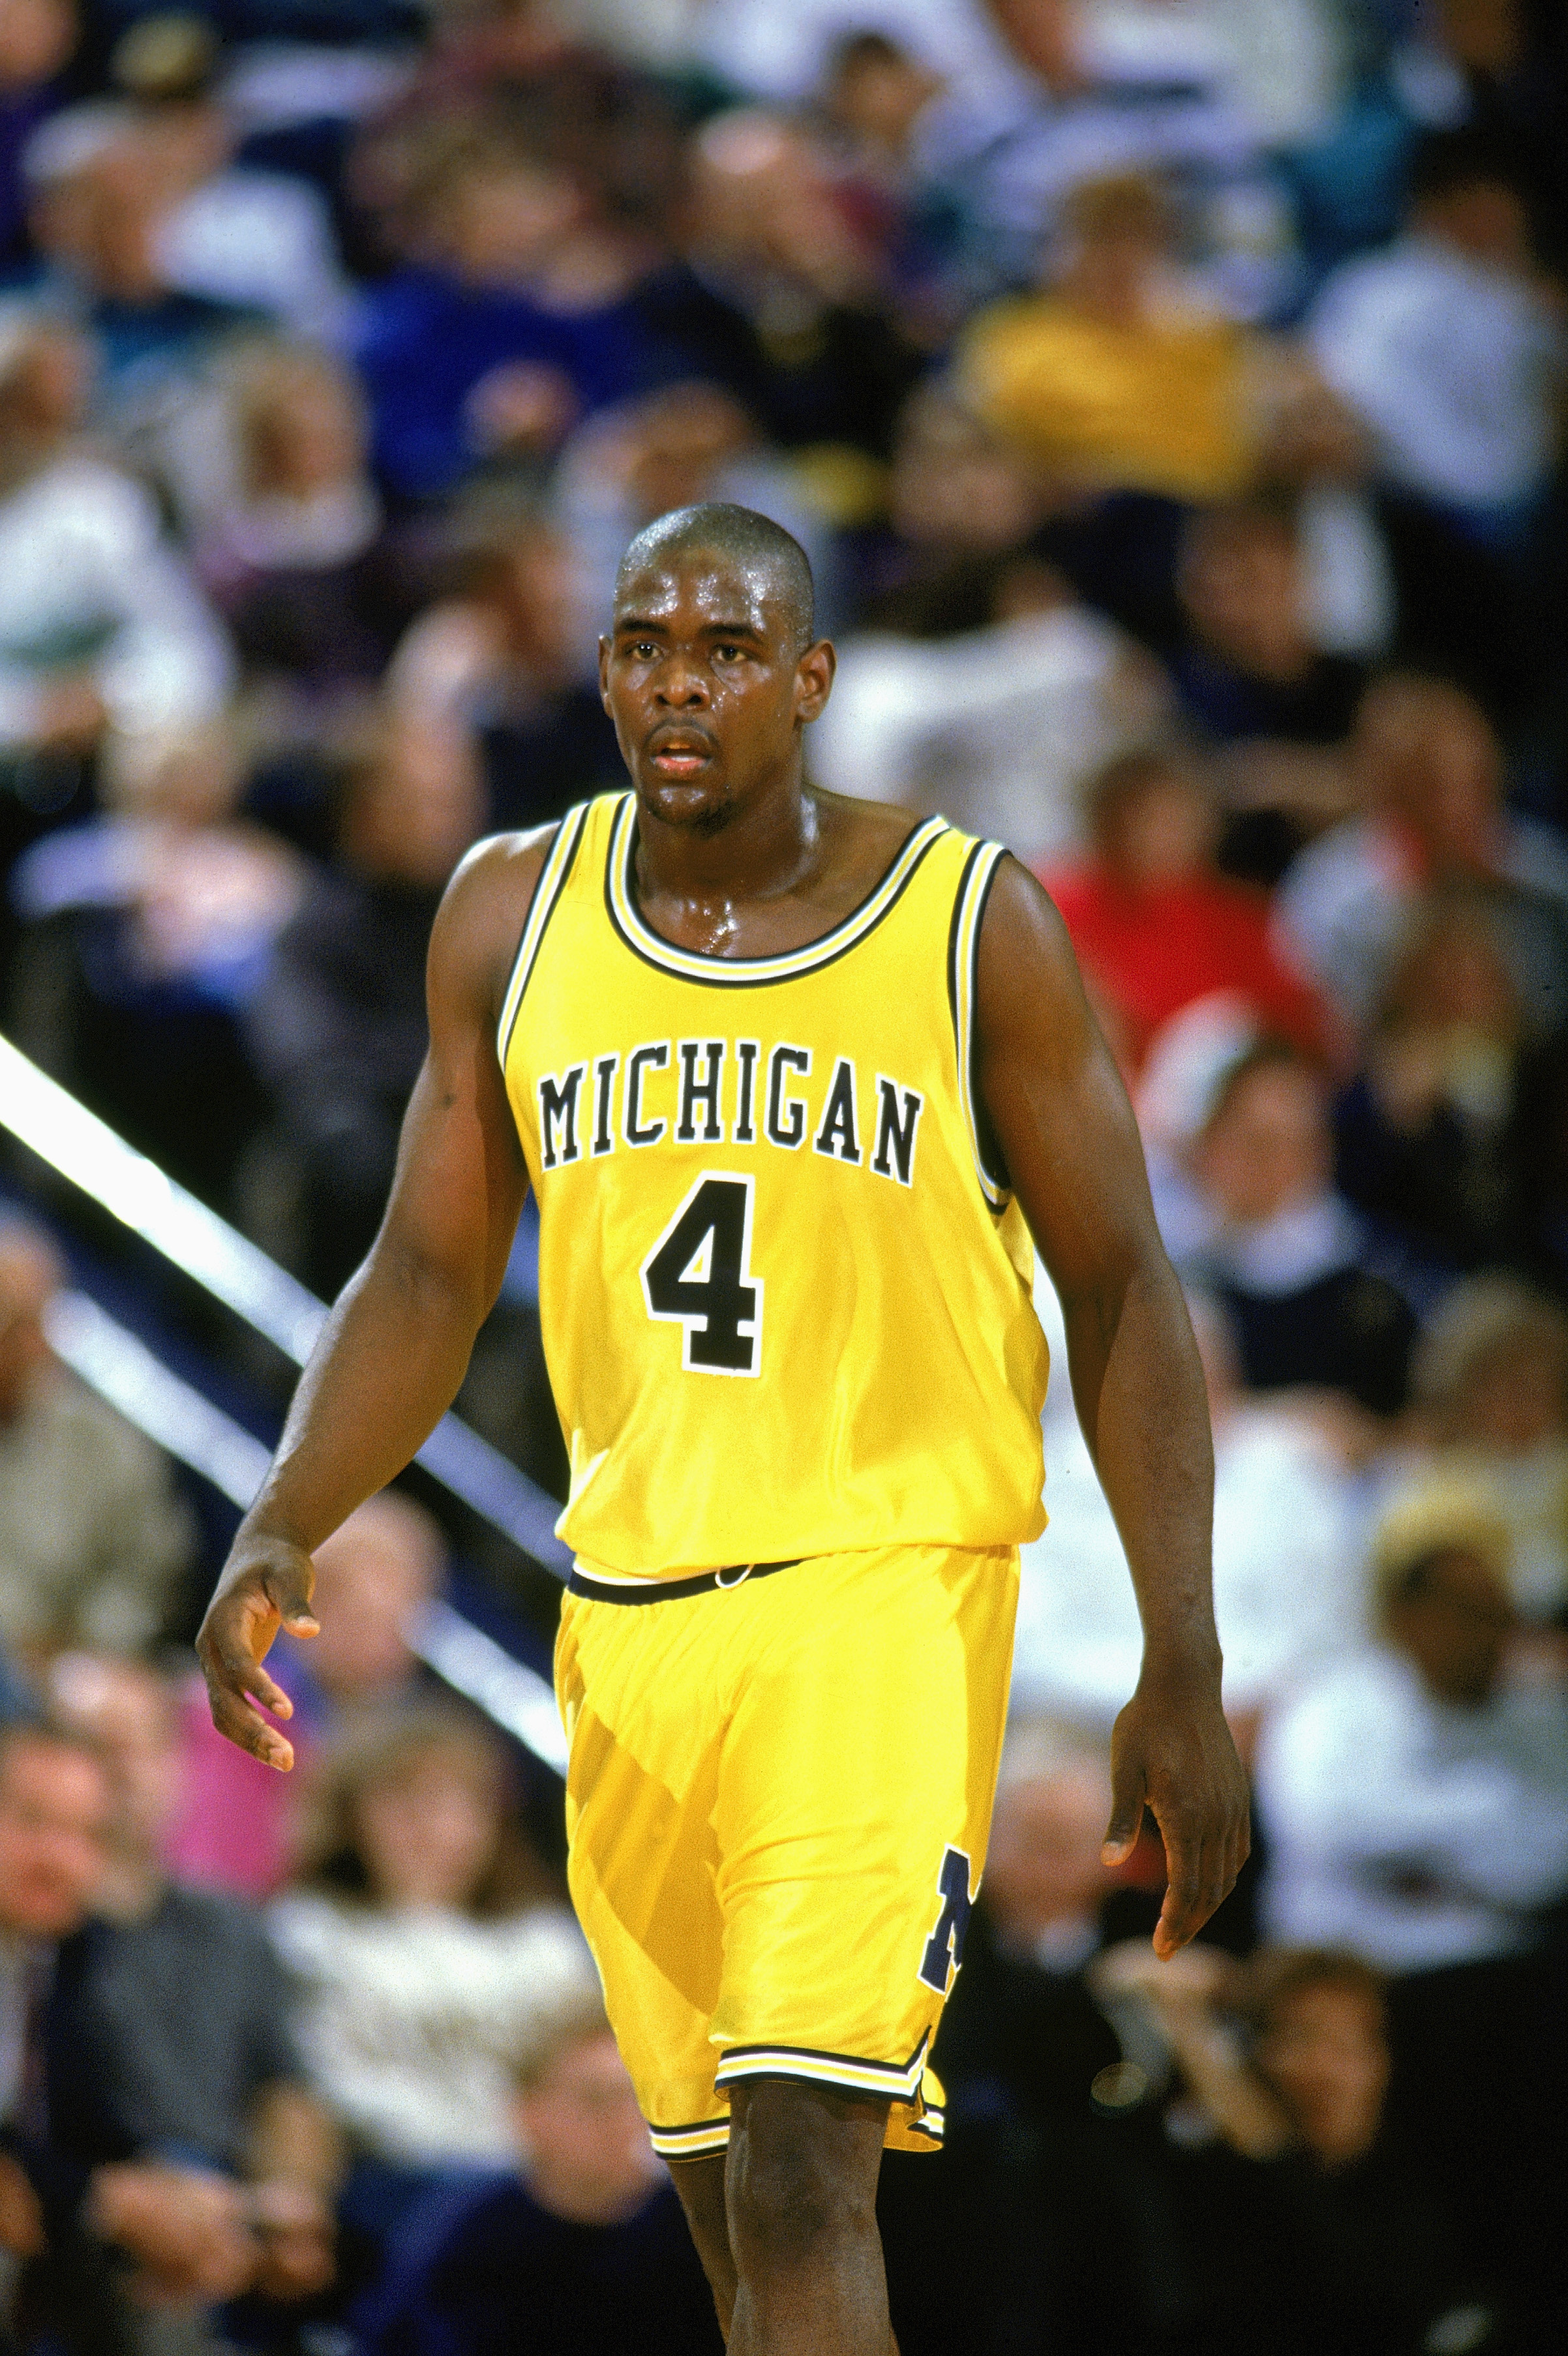 ANN ARBOR, MI - FEBRUARY 20:  University of Michigan star forward Chris Webber strolls upcourt during a game against the University of Minnesota Golden Gophers on February 20, 1993 in Ann Arbor, Michigan. Chris Webber was part of the top recruiting class